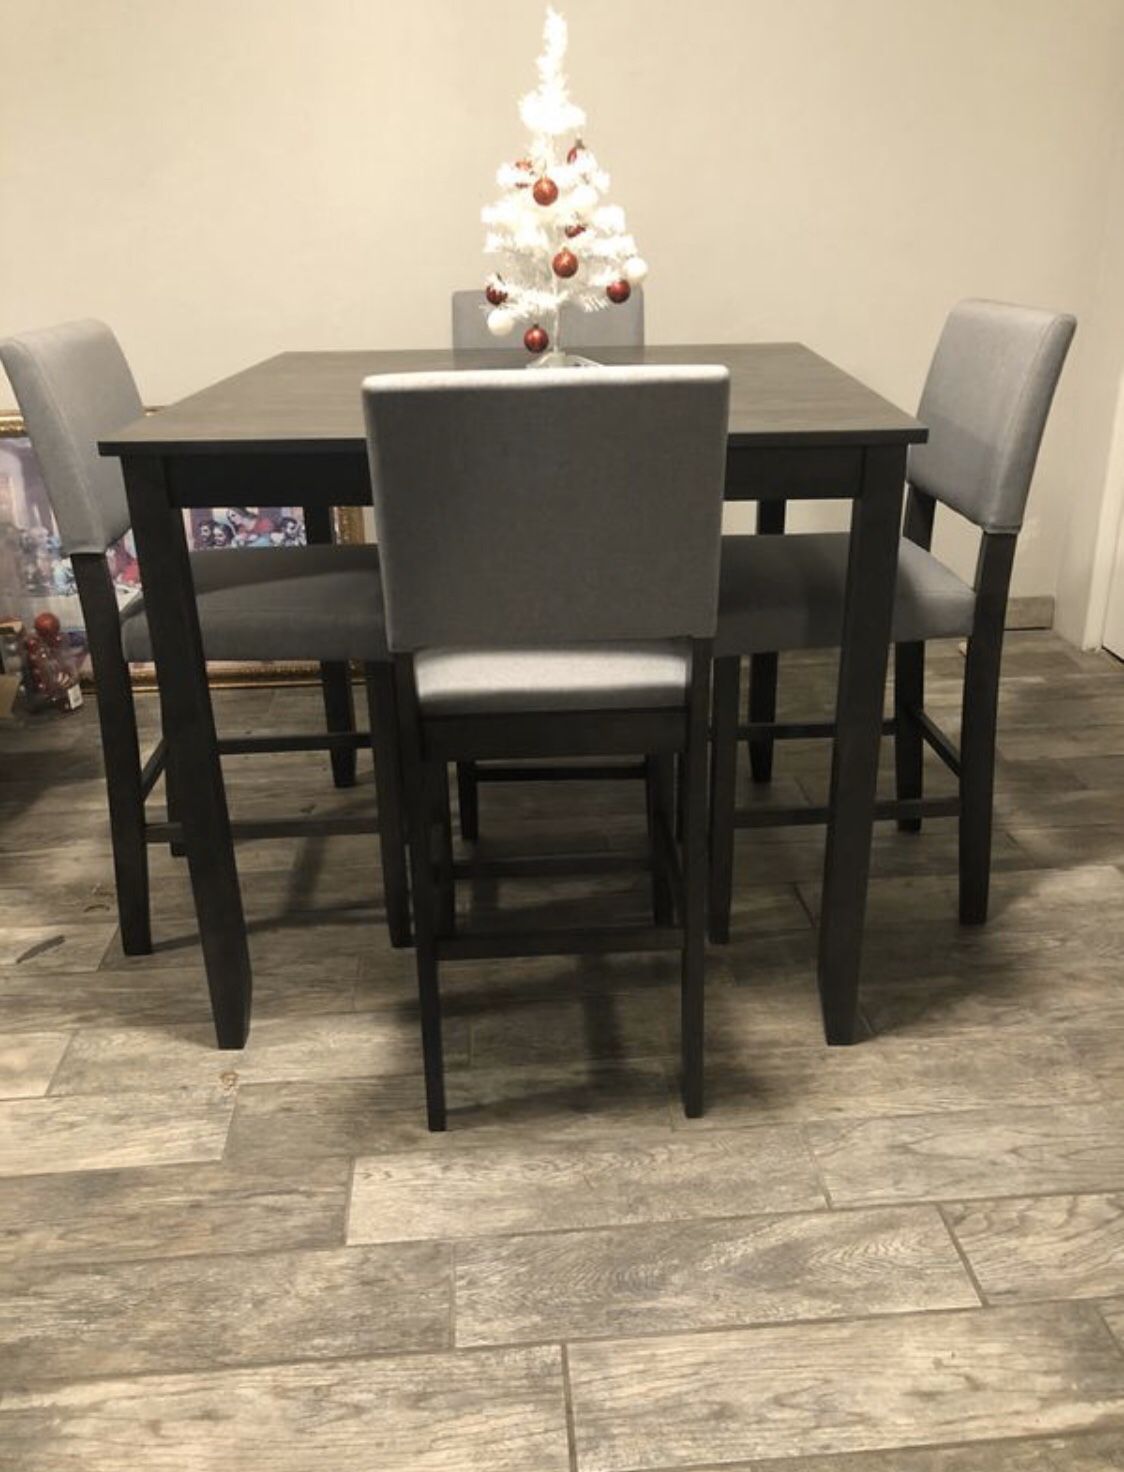 New Grey Table